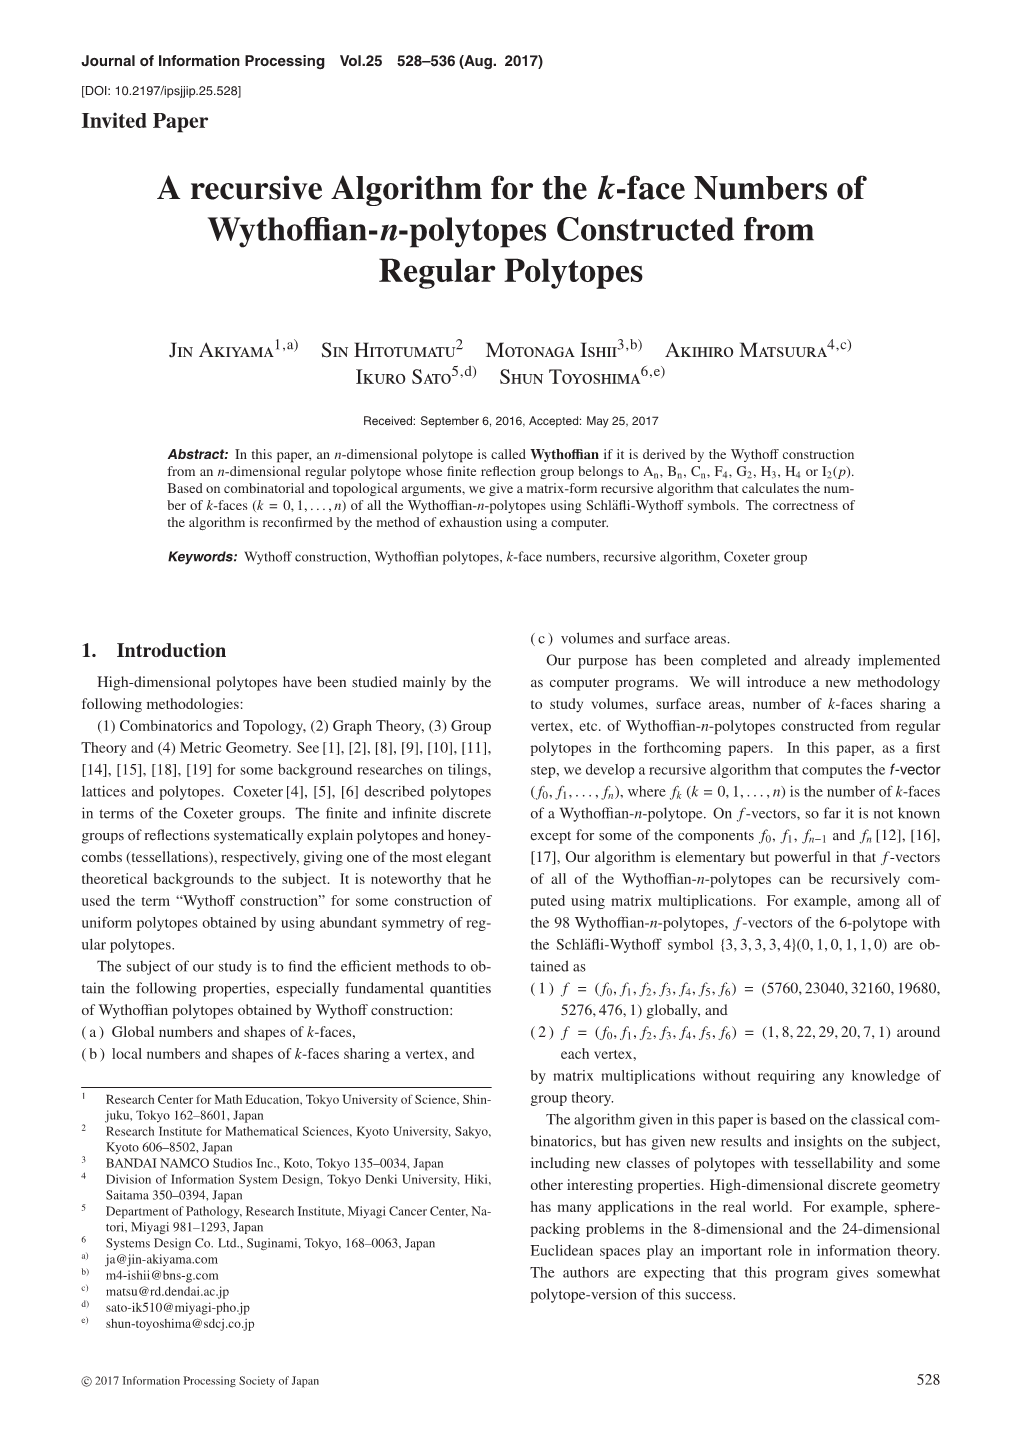 A Recursive Algorithm for the K-Face Numbers of Wythoffian-N-Polytopes Constructed from Regular Polytopes